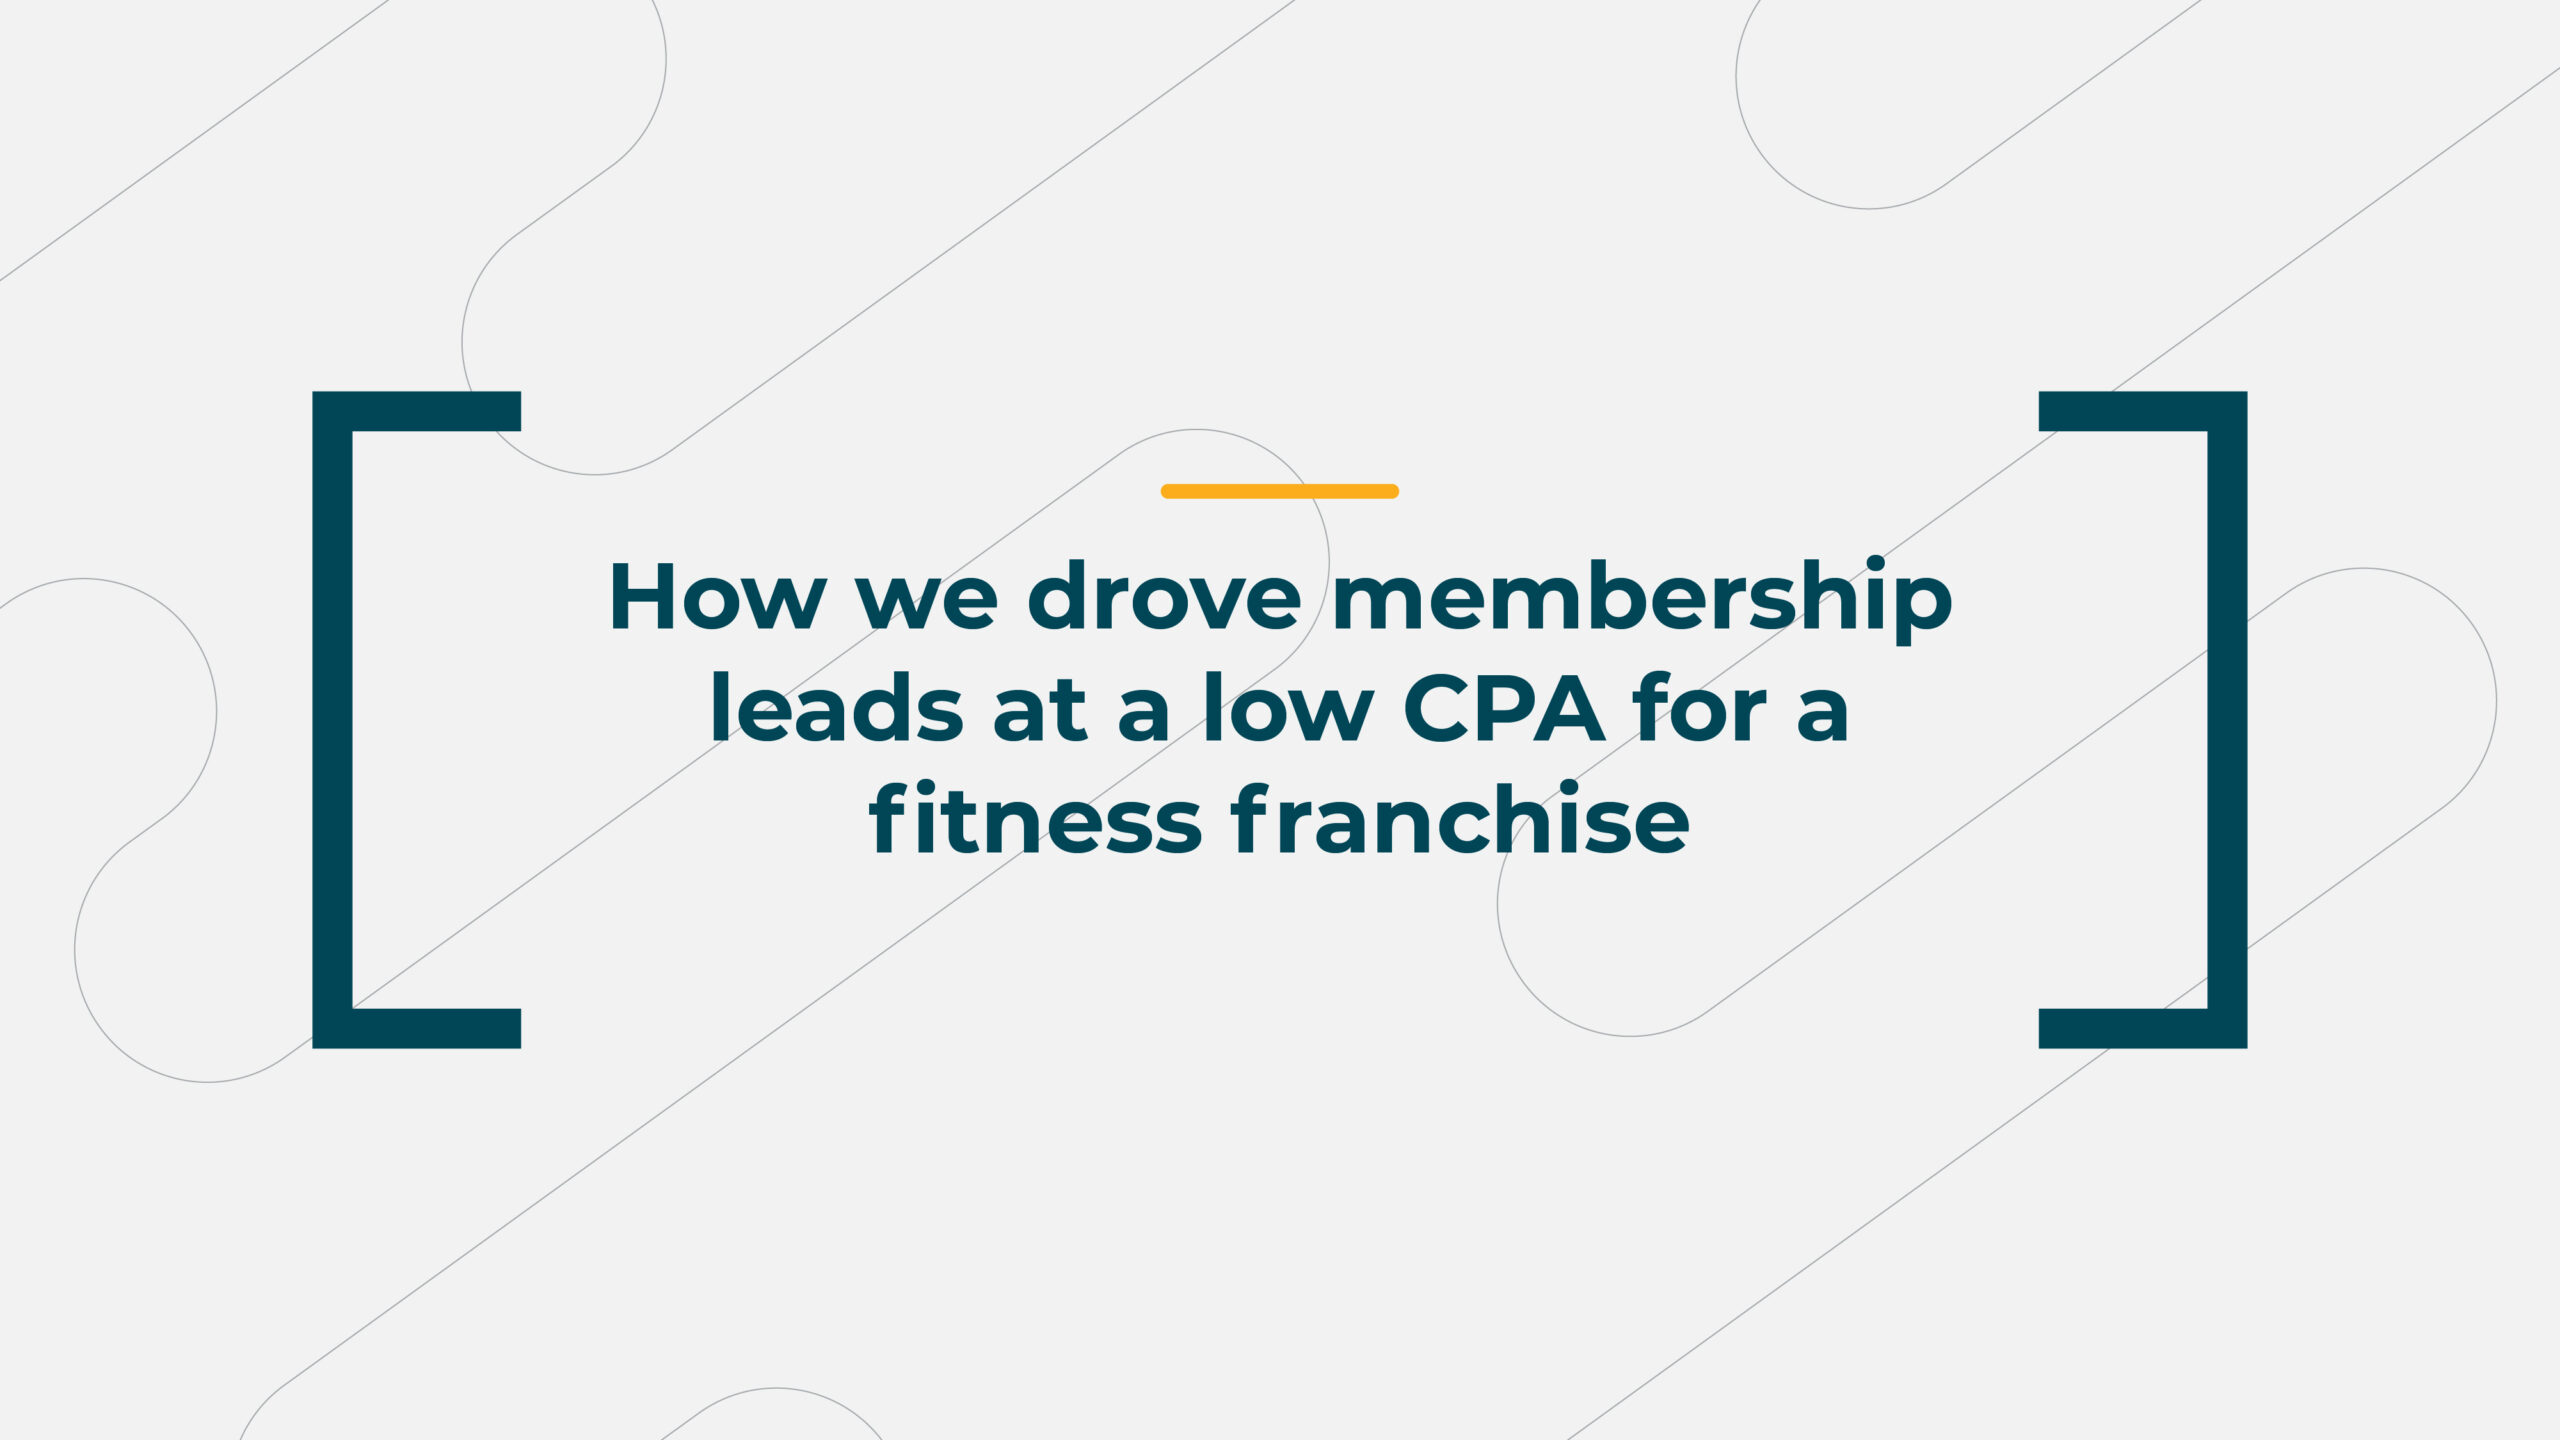 How We Drove Membership Leads At A Low CPA For A Fitness Franchise